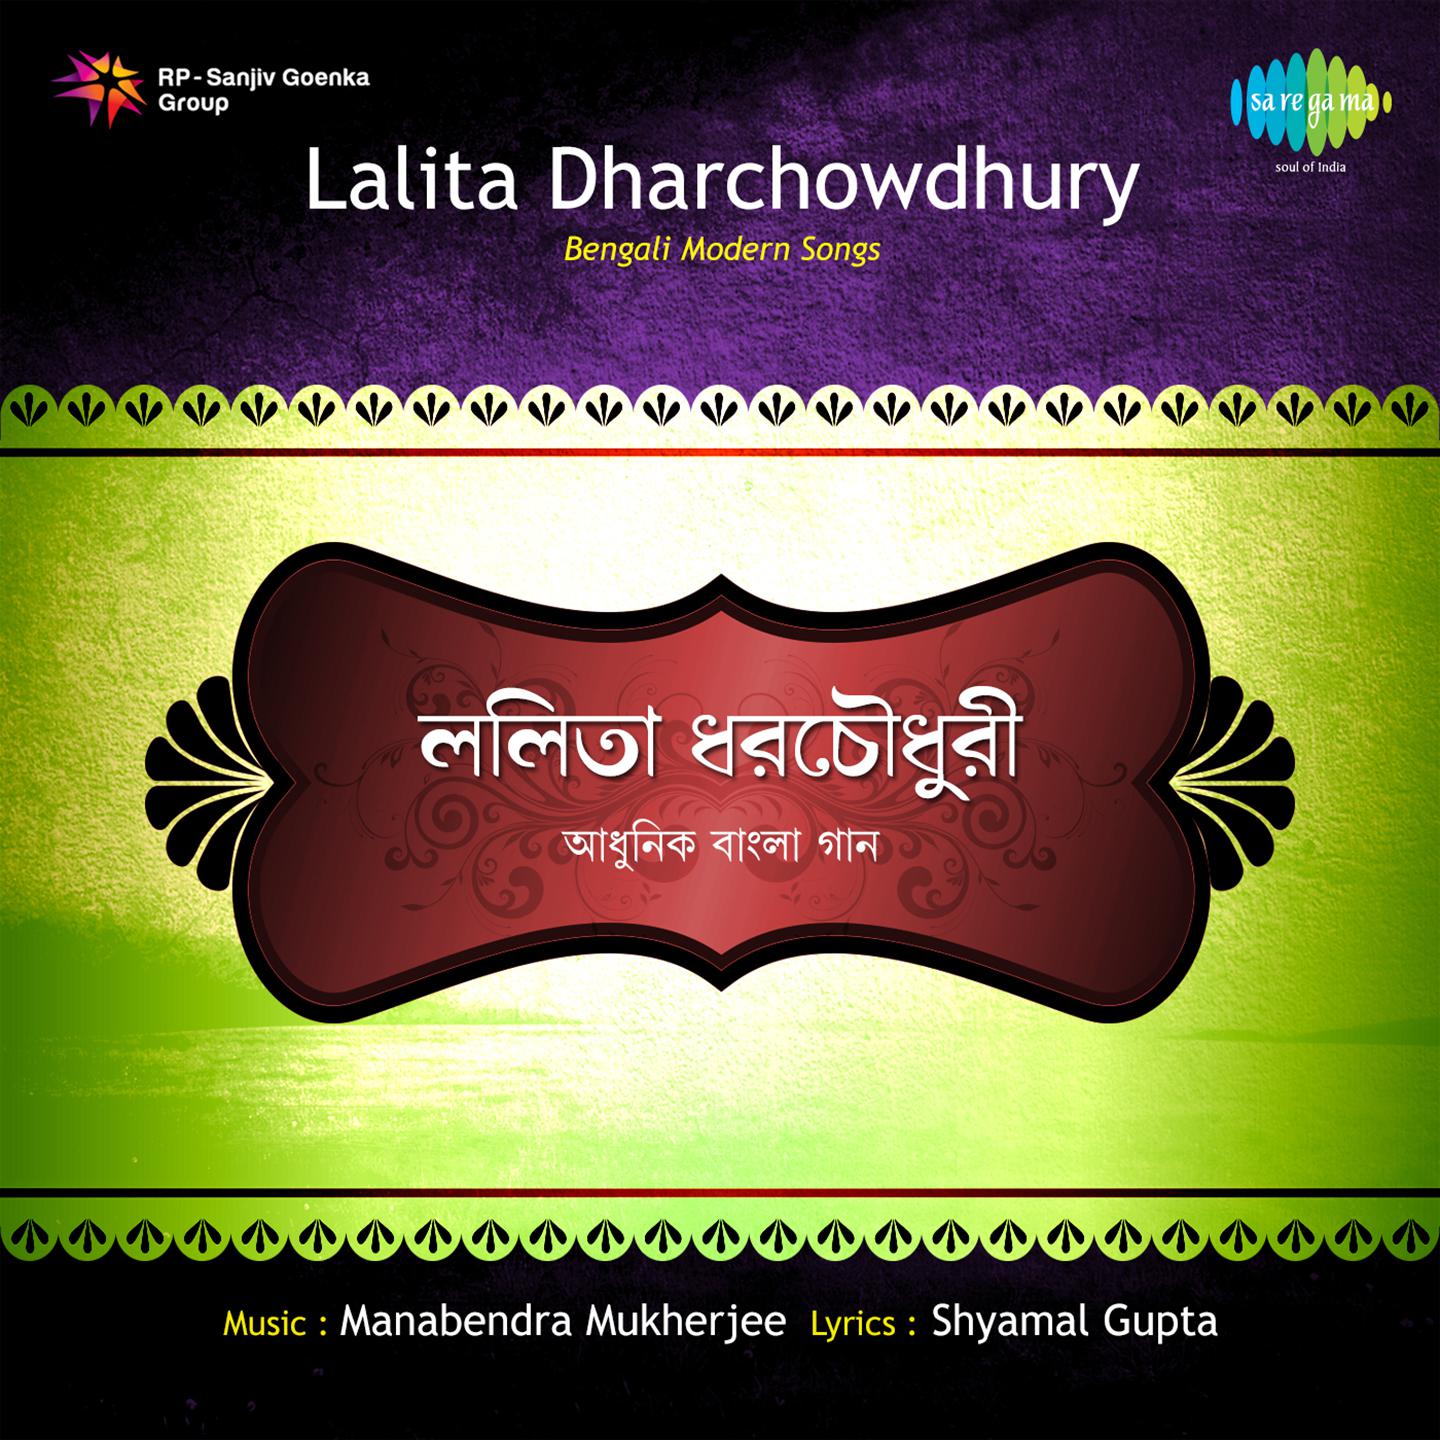 Various Bengali Songs From Ep